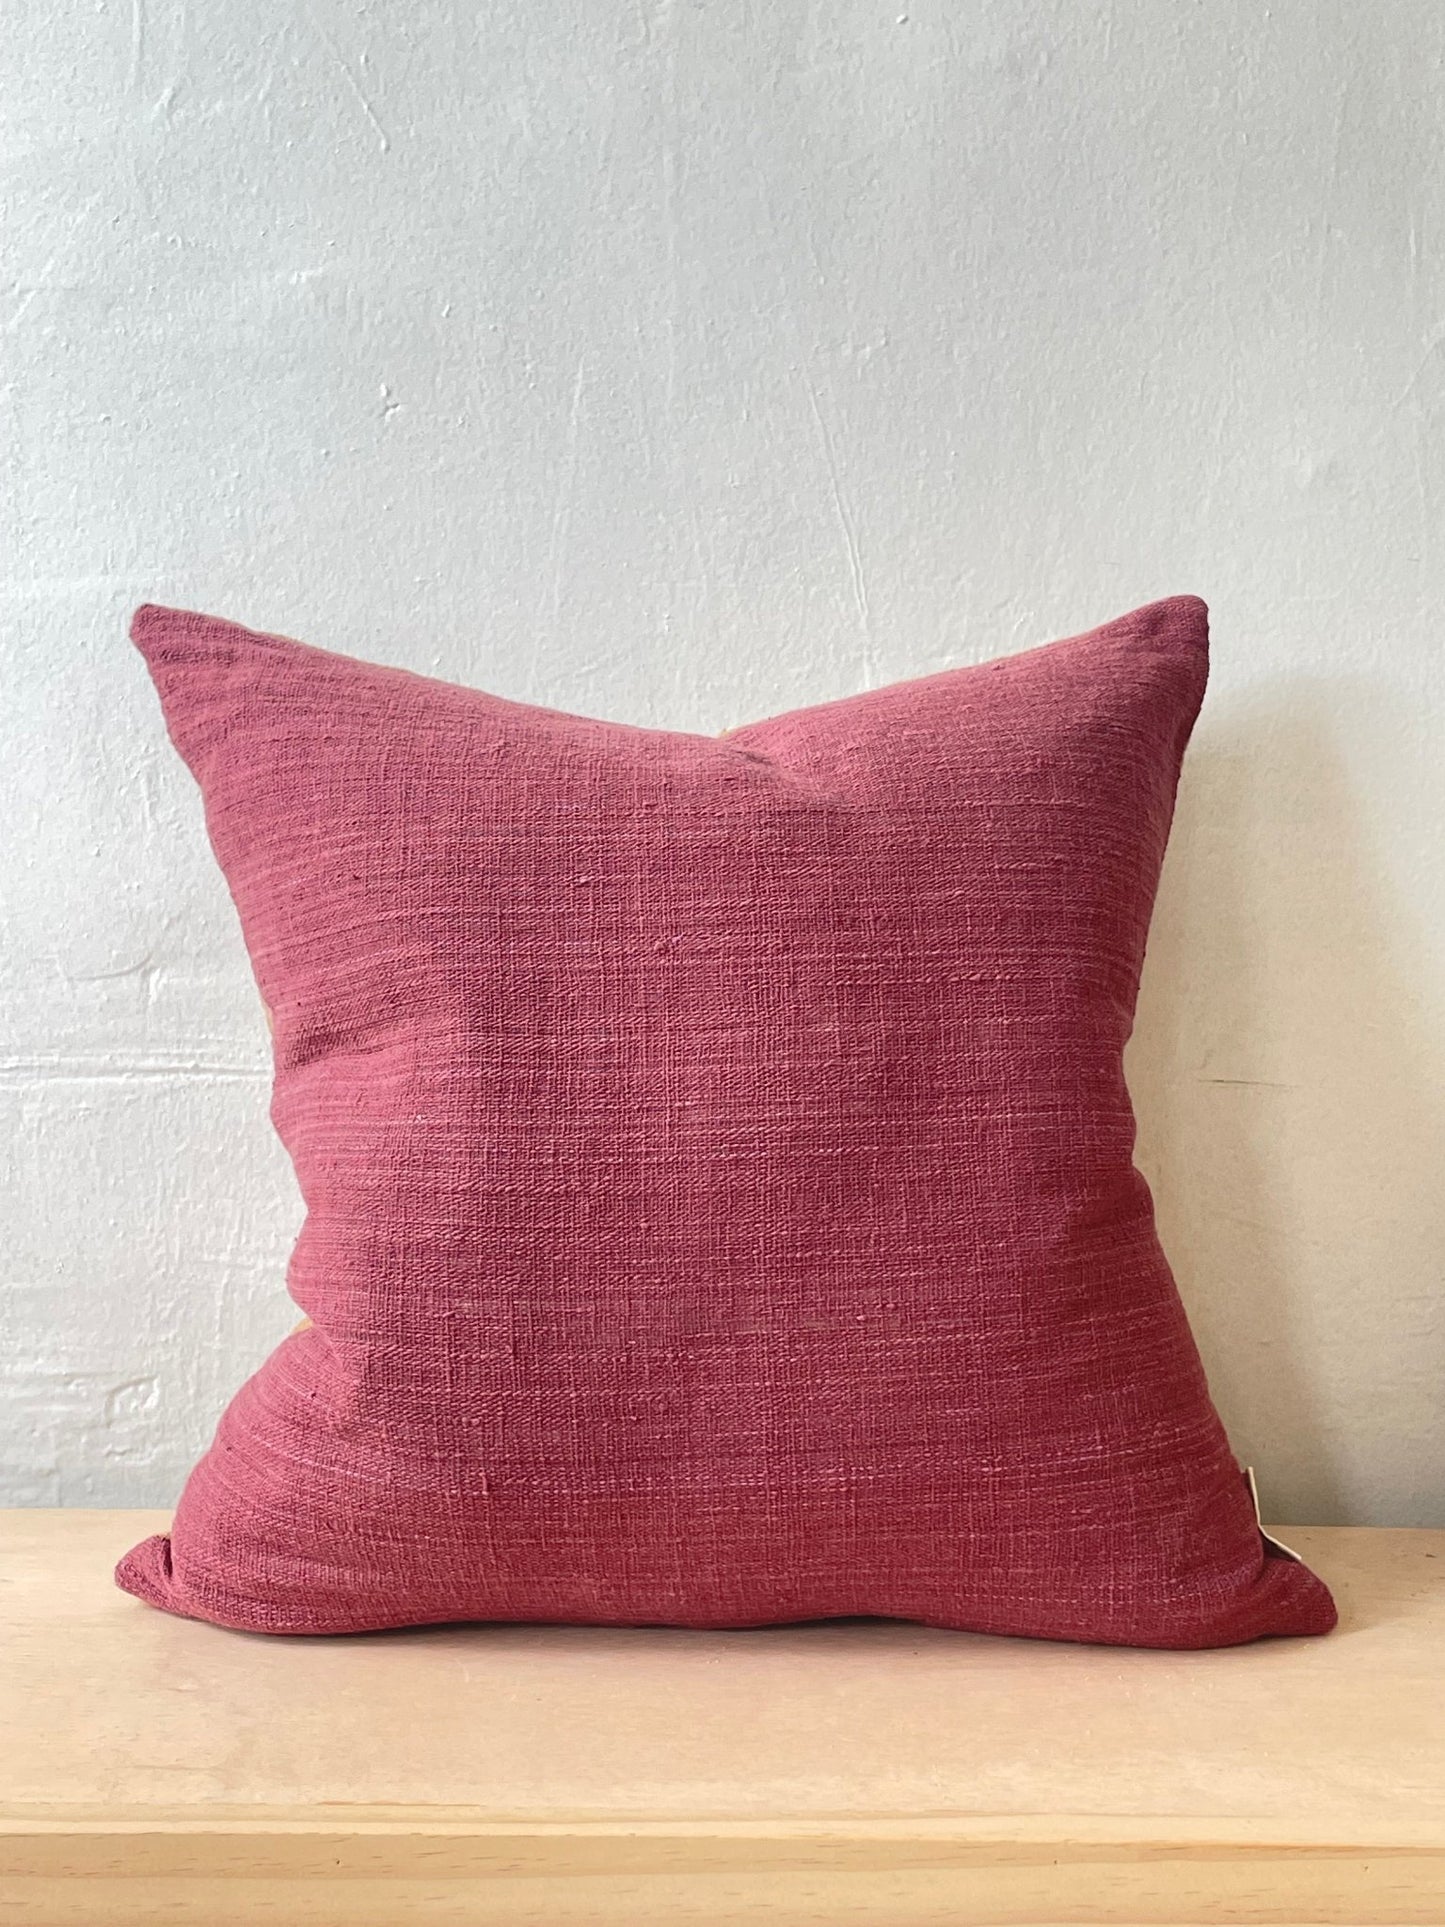 Sunkissed pillow - Grana - Behind the Hill